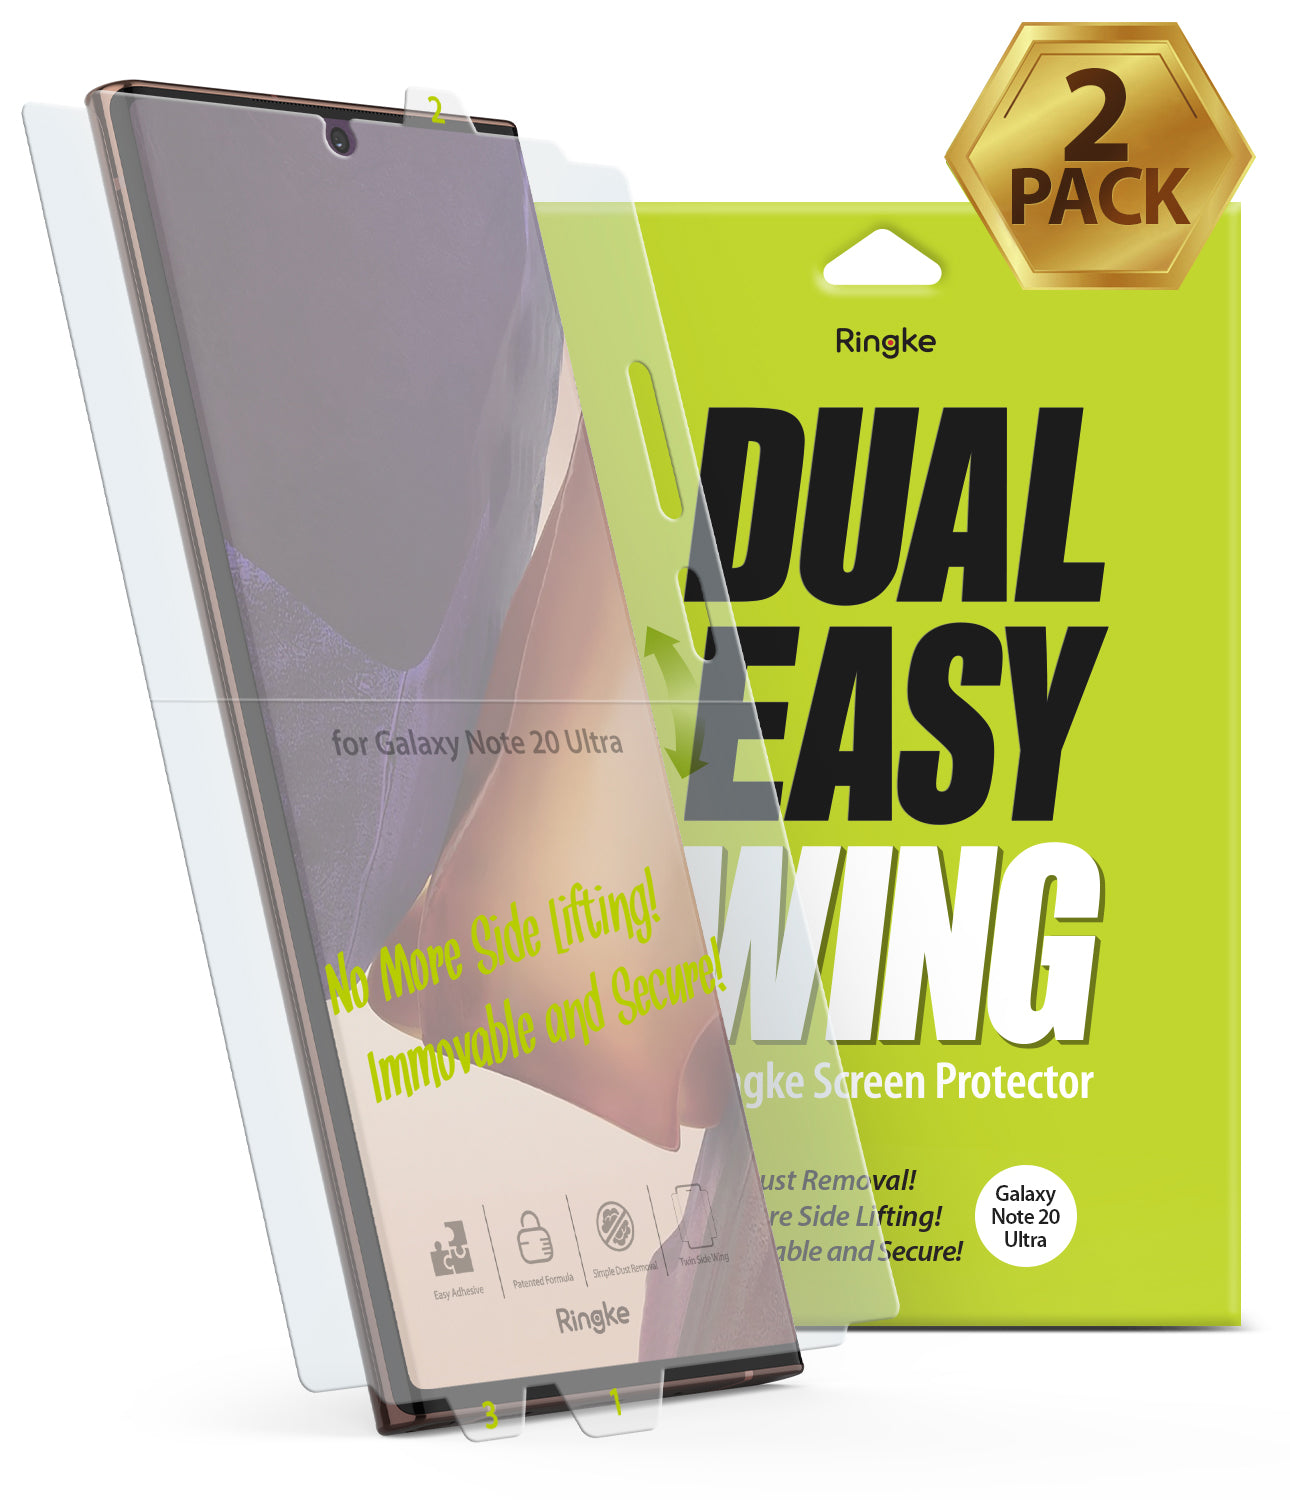 Galaxy Note 20 Ultra Screen Protector | Dual Easy Film - Ringke Official Store